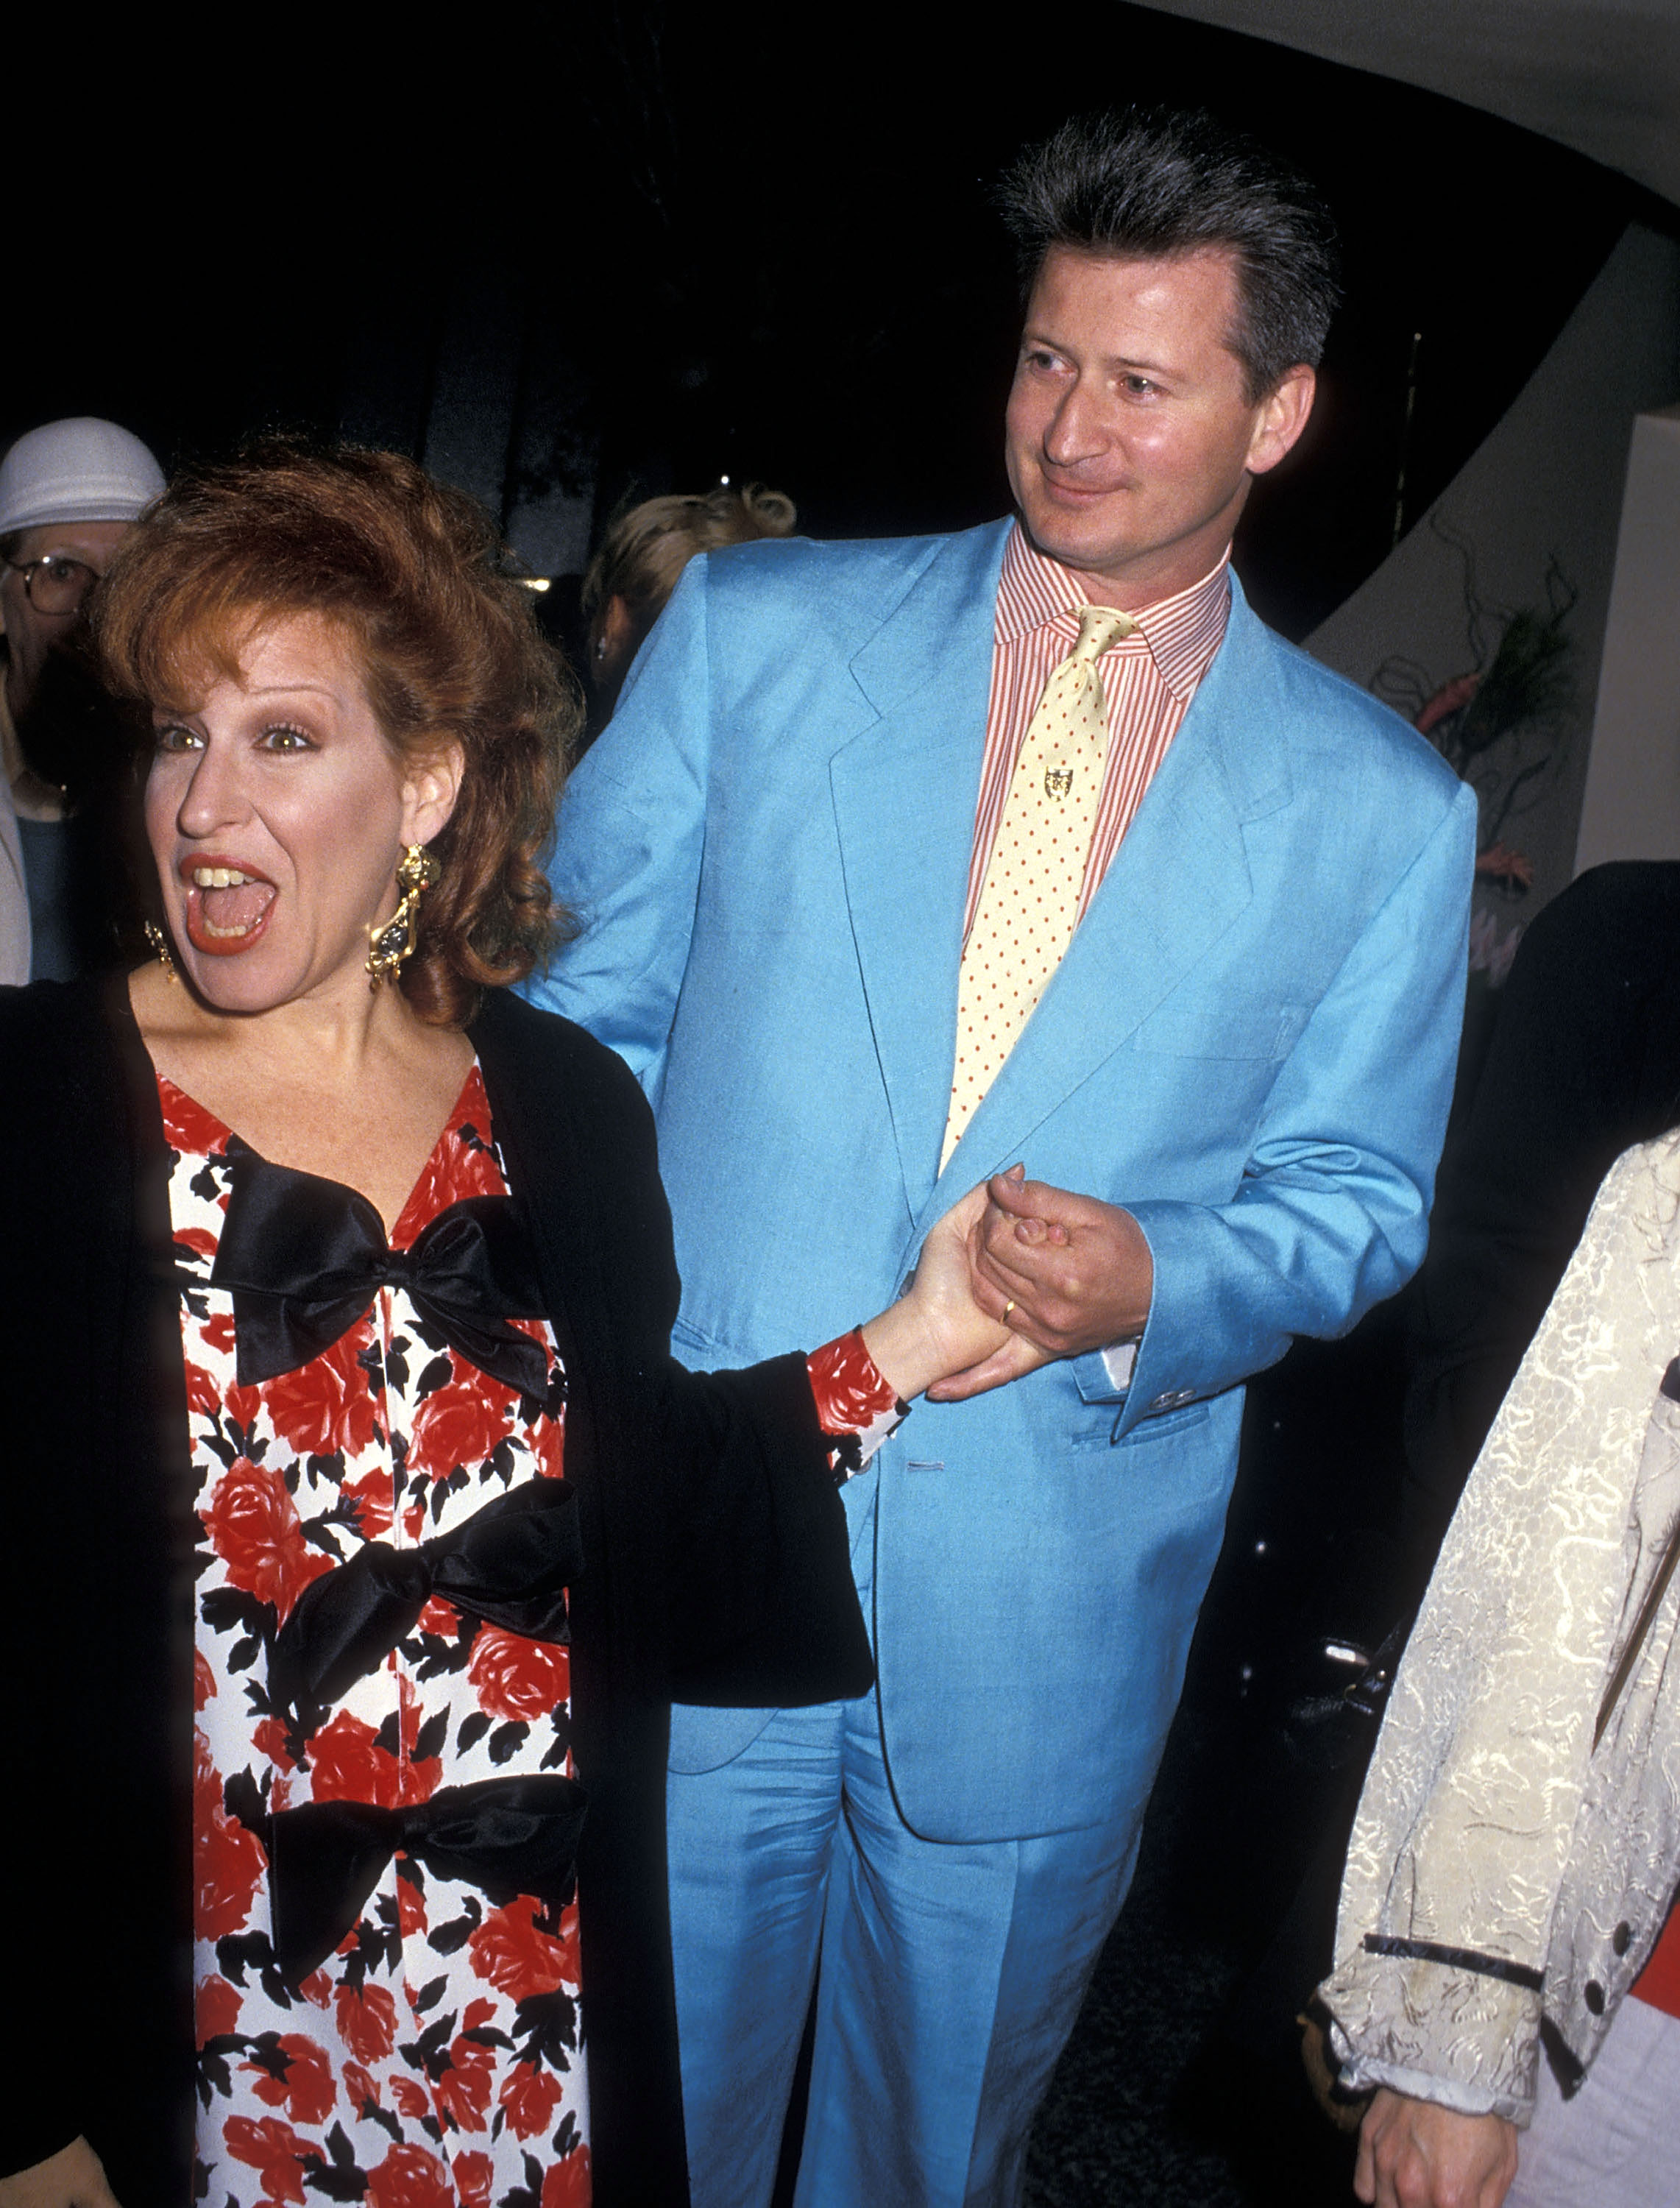 Singer Bette Midler and husband Martin von Haselberg attend the screening party for the HBO Special "Bette Midler's Mondo Beyondo" on March 9, 1988 at Palette Restaurant in Los Angeles, California. | Source: Getty Images